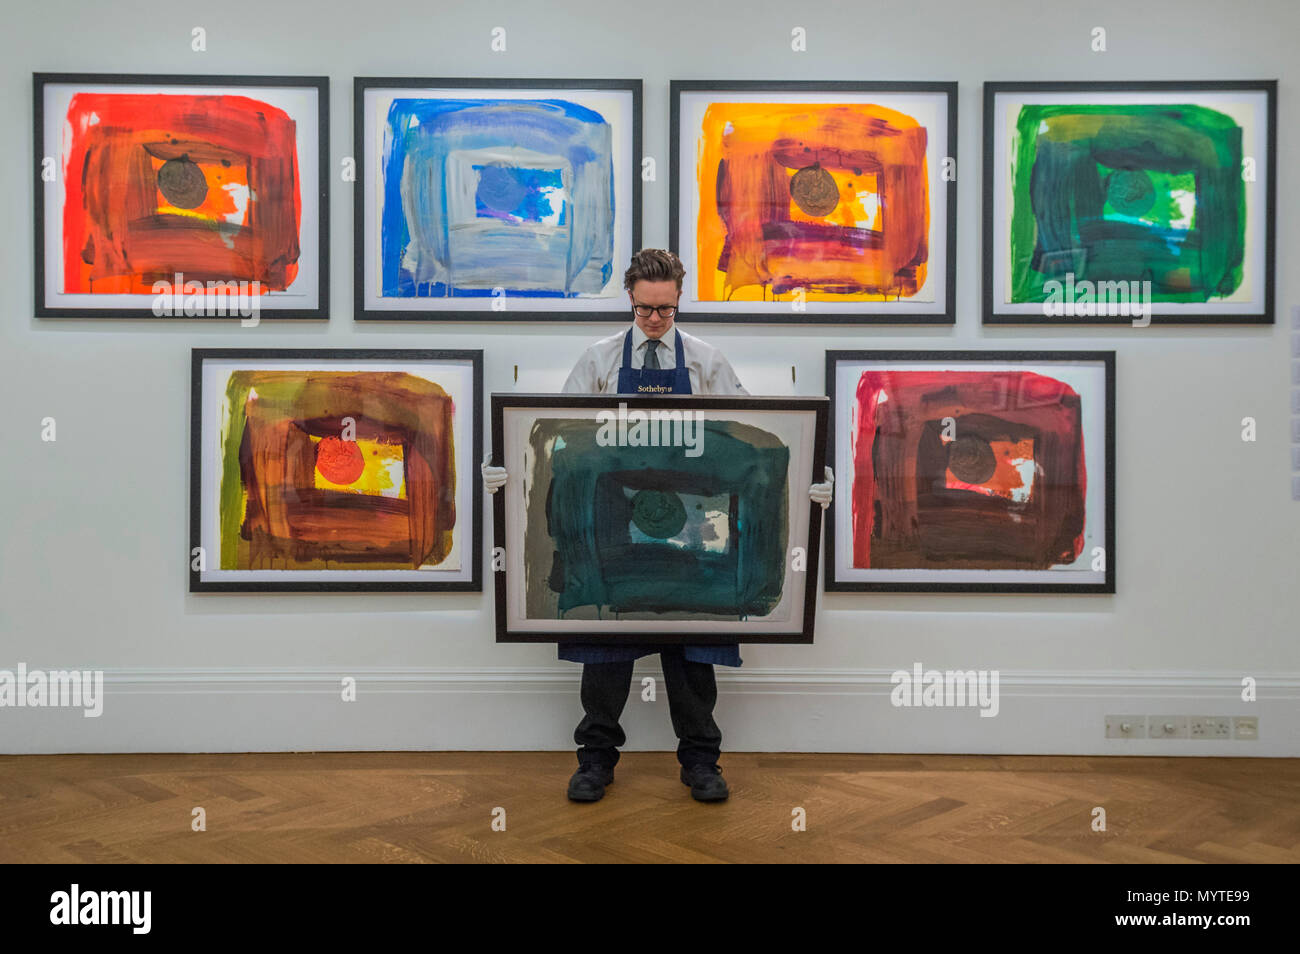 London, UK. 8th Jun, 2018. The 'For Alan' Series, part of Working on Paper by Howard Hodgkin, est £15-7,000 each - Modern & Post-War British Art, part of Modern British Art Week Sotheby’s New Bond Street, London, on 12-13 June 2018. Credit: Guy Bell/Alamy Live News Stock Photo